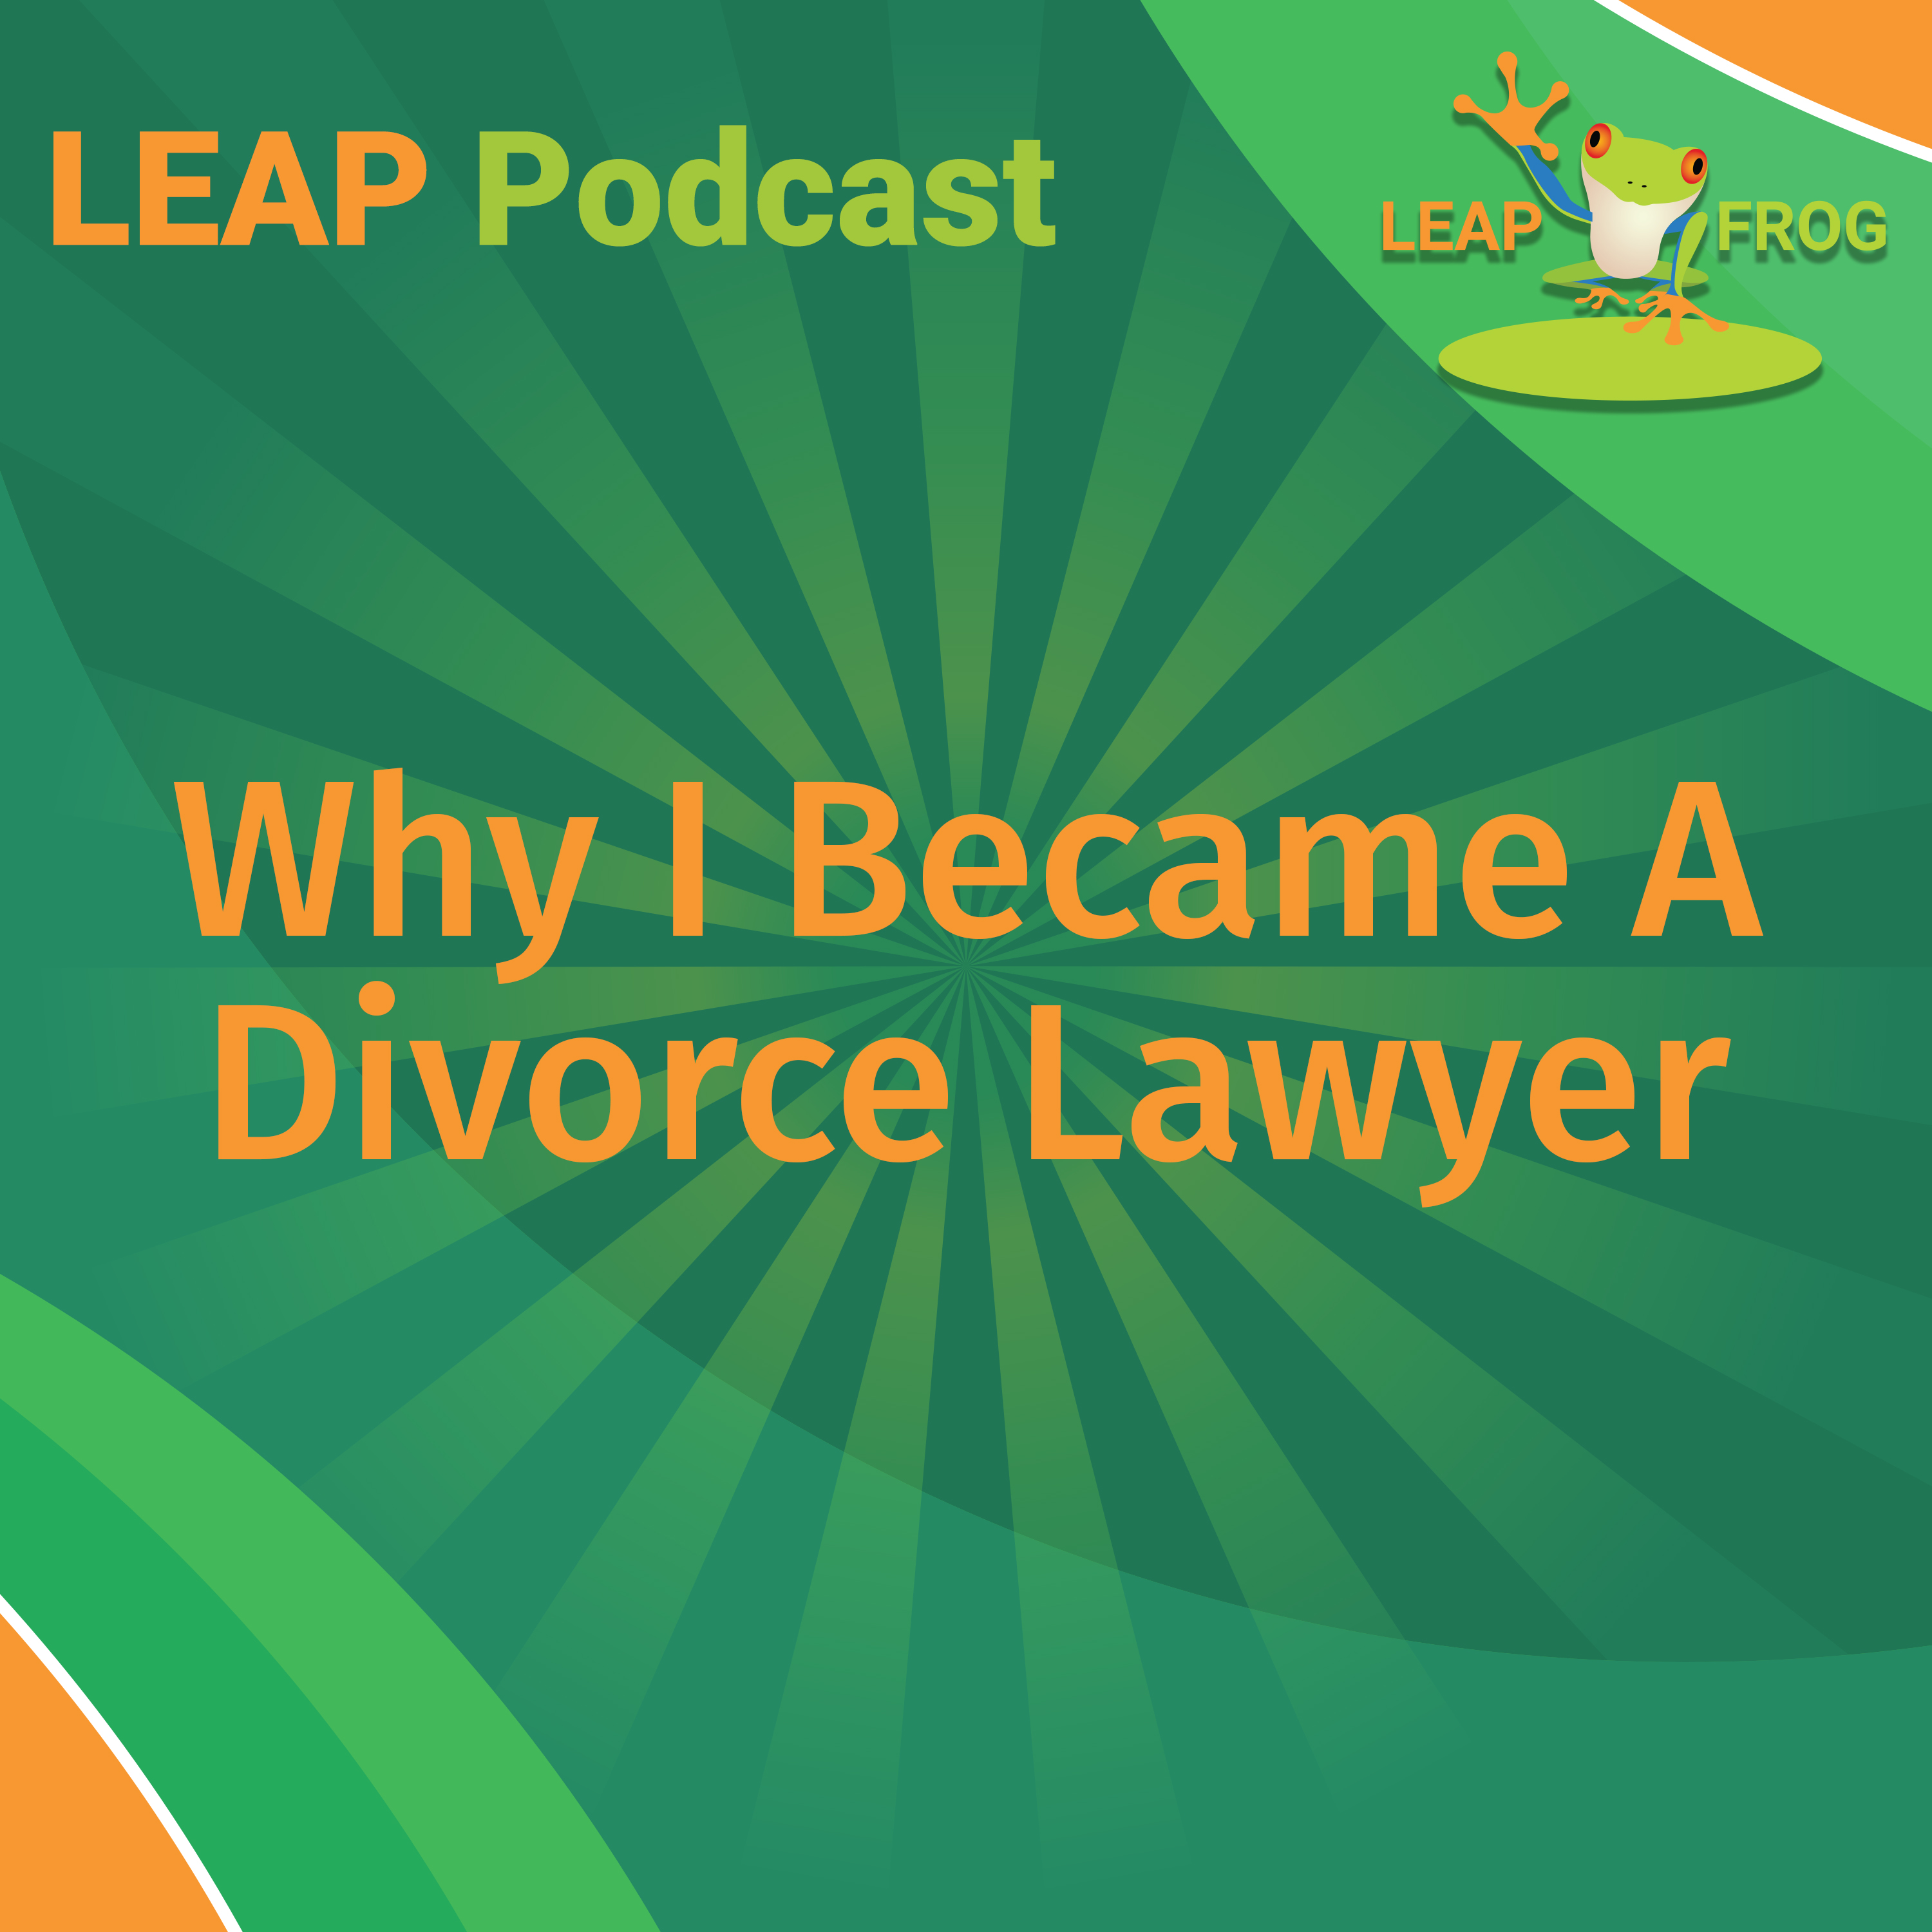 LEAP Podcast Why I Became A Divorce Lawyer episode cover art